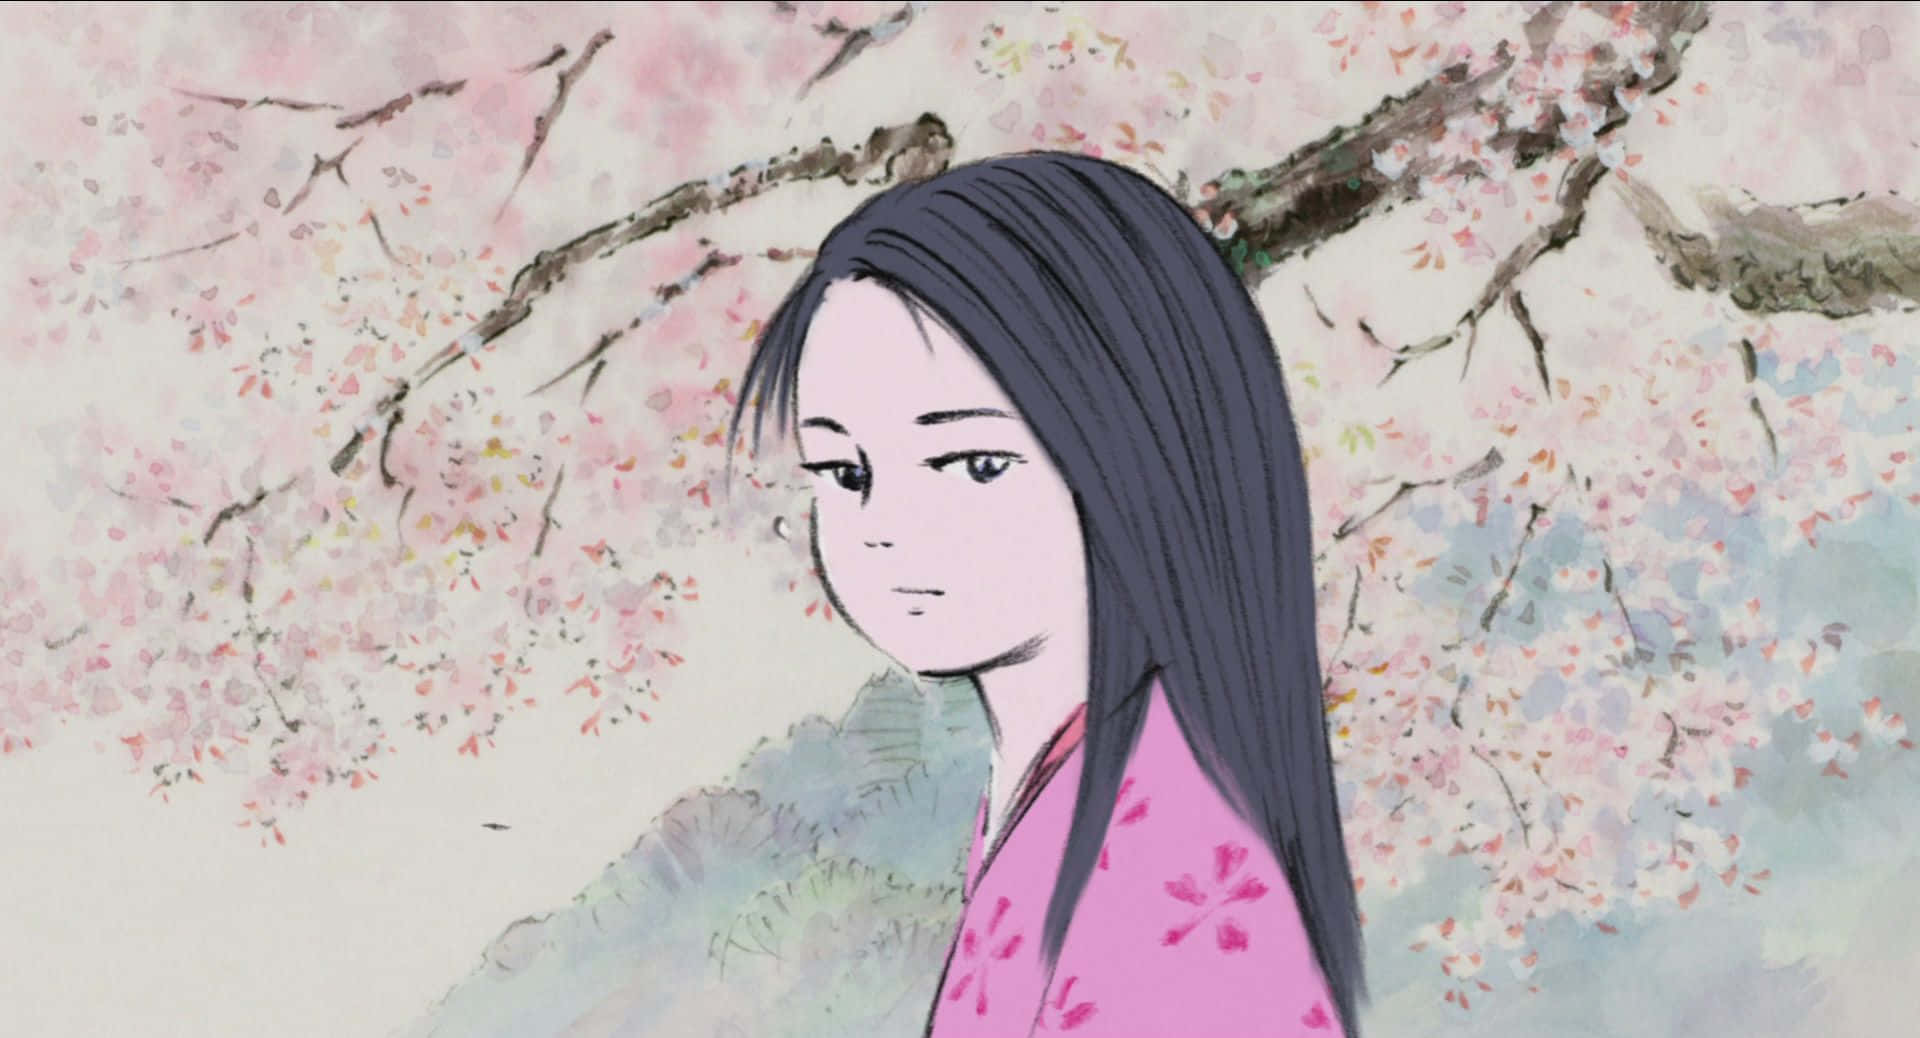 Princess Kaguya surrounded by colorful sparkles in a dreamy forest Wallpaper